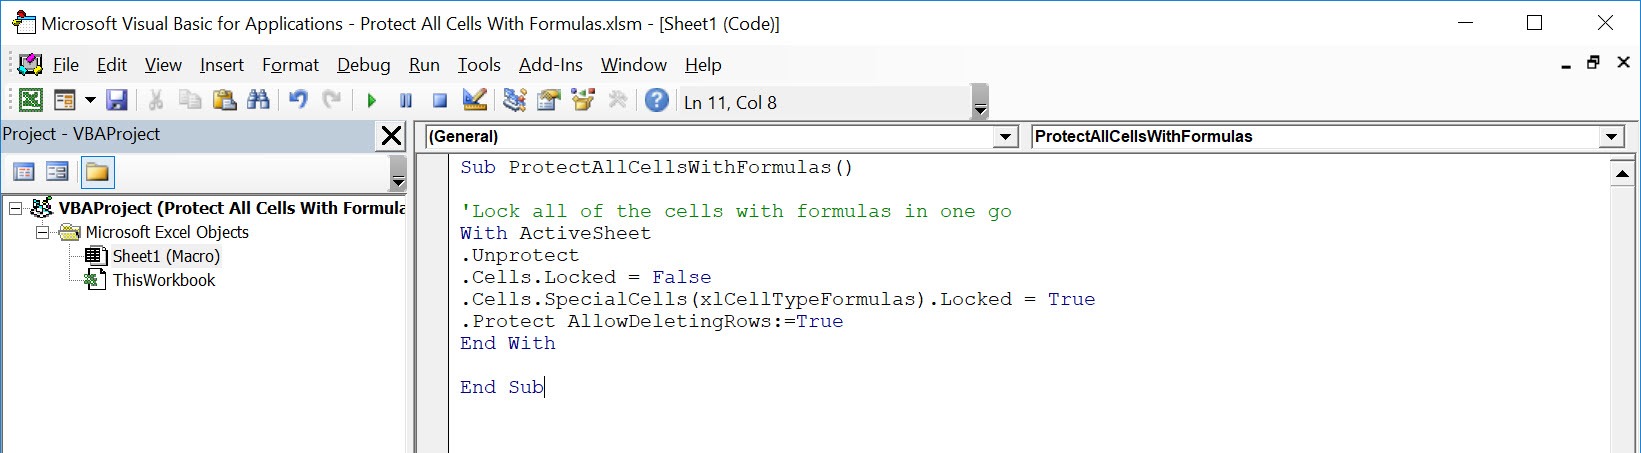 Protect All Cells With Formulas Using Macros In Excel | MyExcelOnline